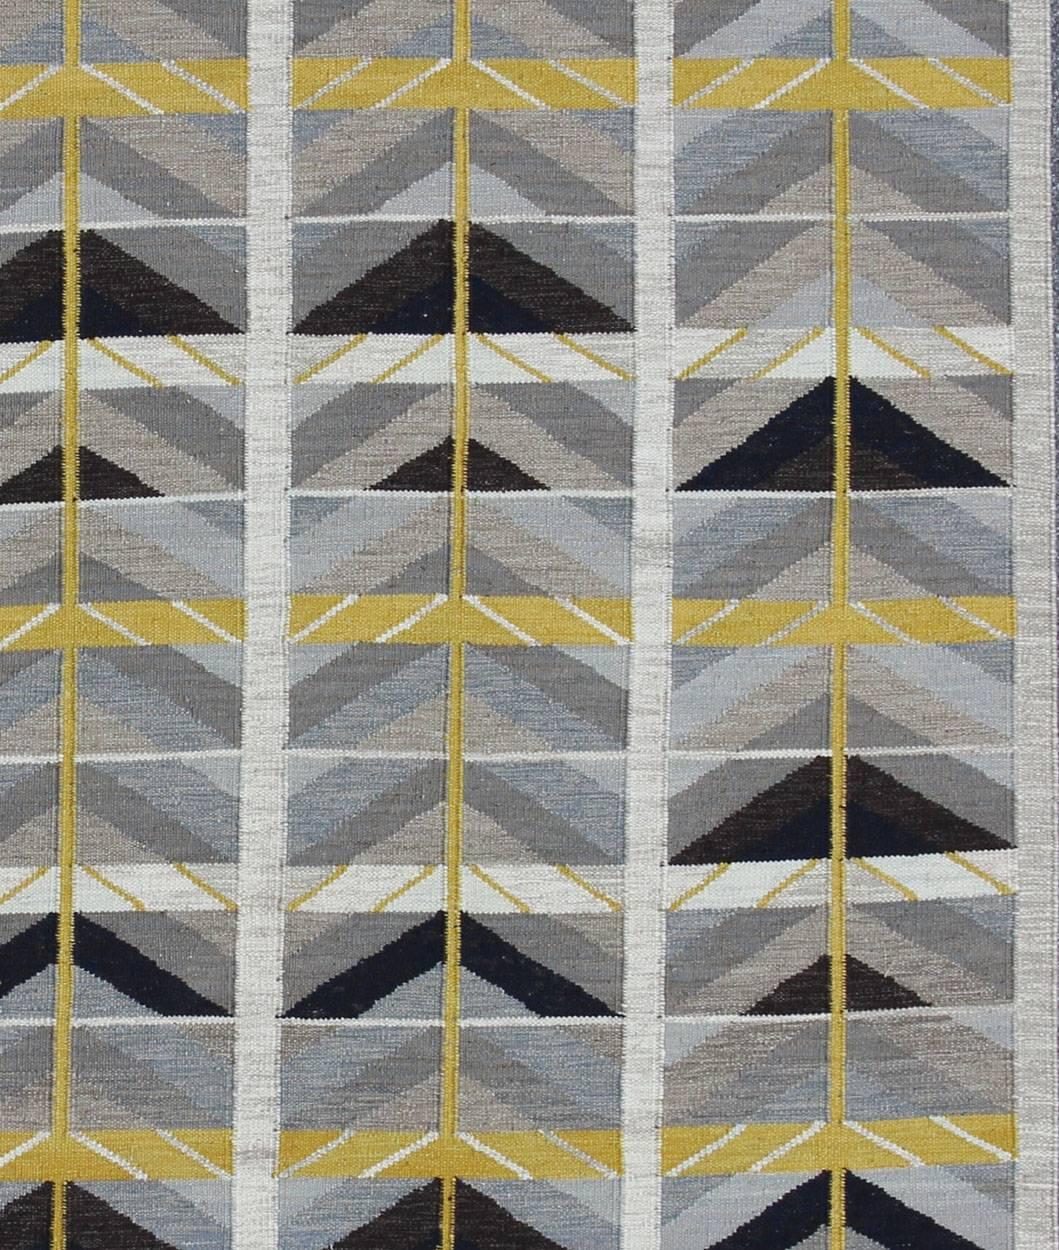  Modern Swedish Rug in Gold, Gray and Black by Keivan Woven Arts. Modern Scandinavian/Swedish.

Measures: 9'4 x 11'5.

This Scandinavian Flat-Weave patterned rug is inspired by the work of Swedish textile designers of the early to mid-20th Century.